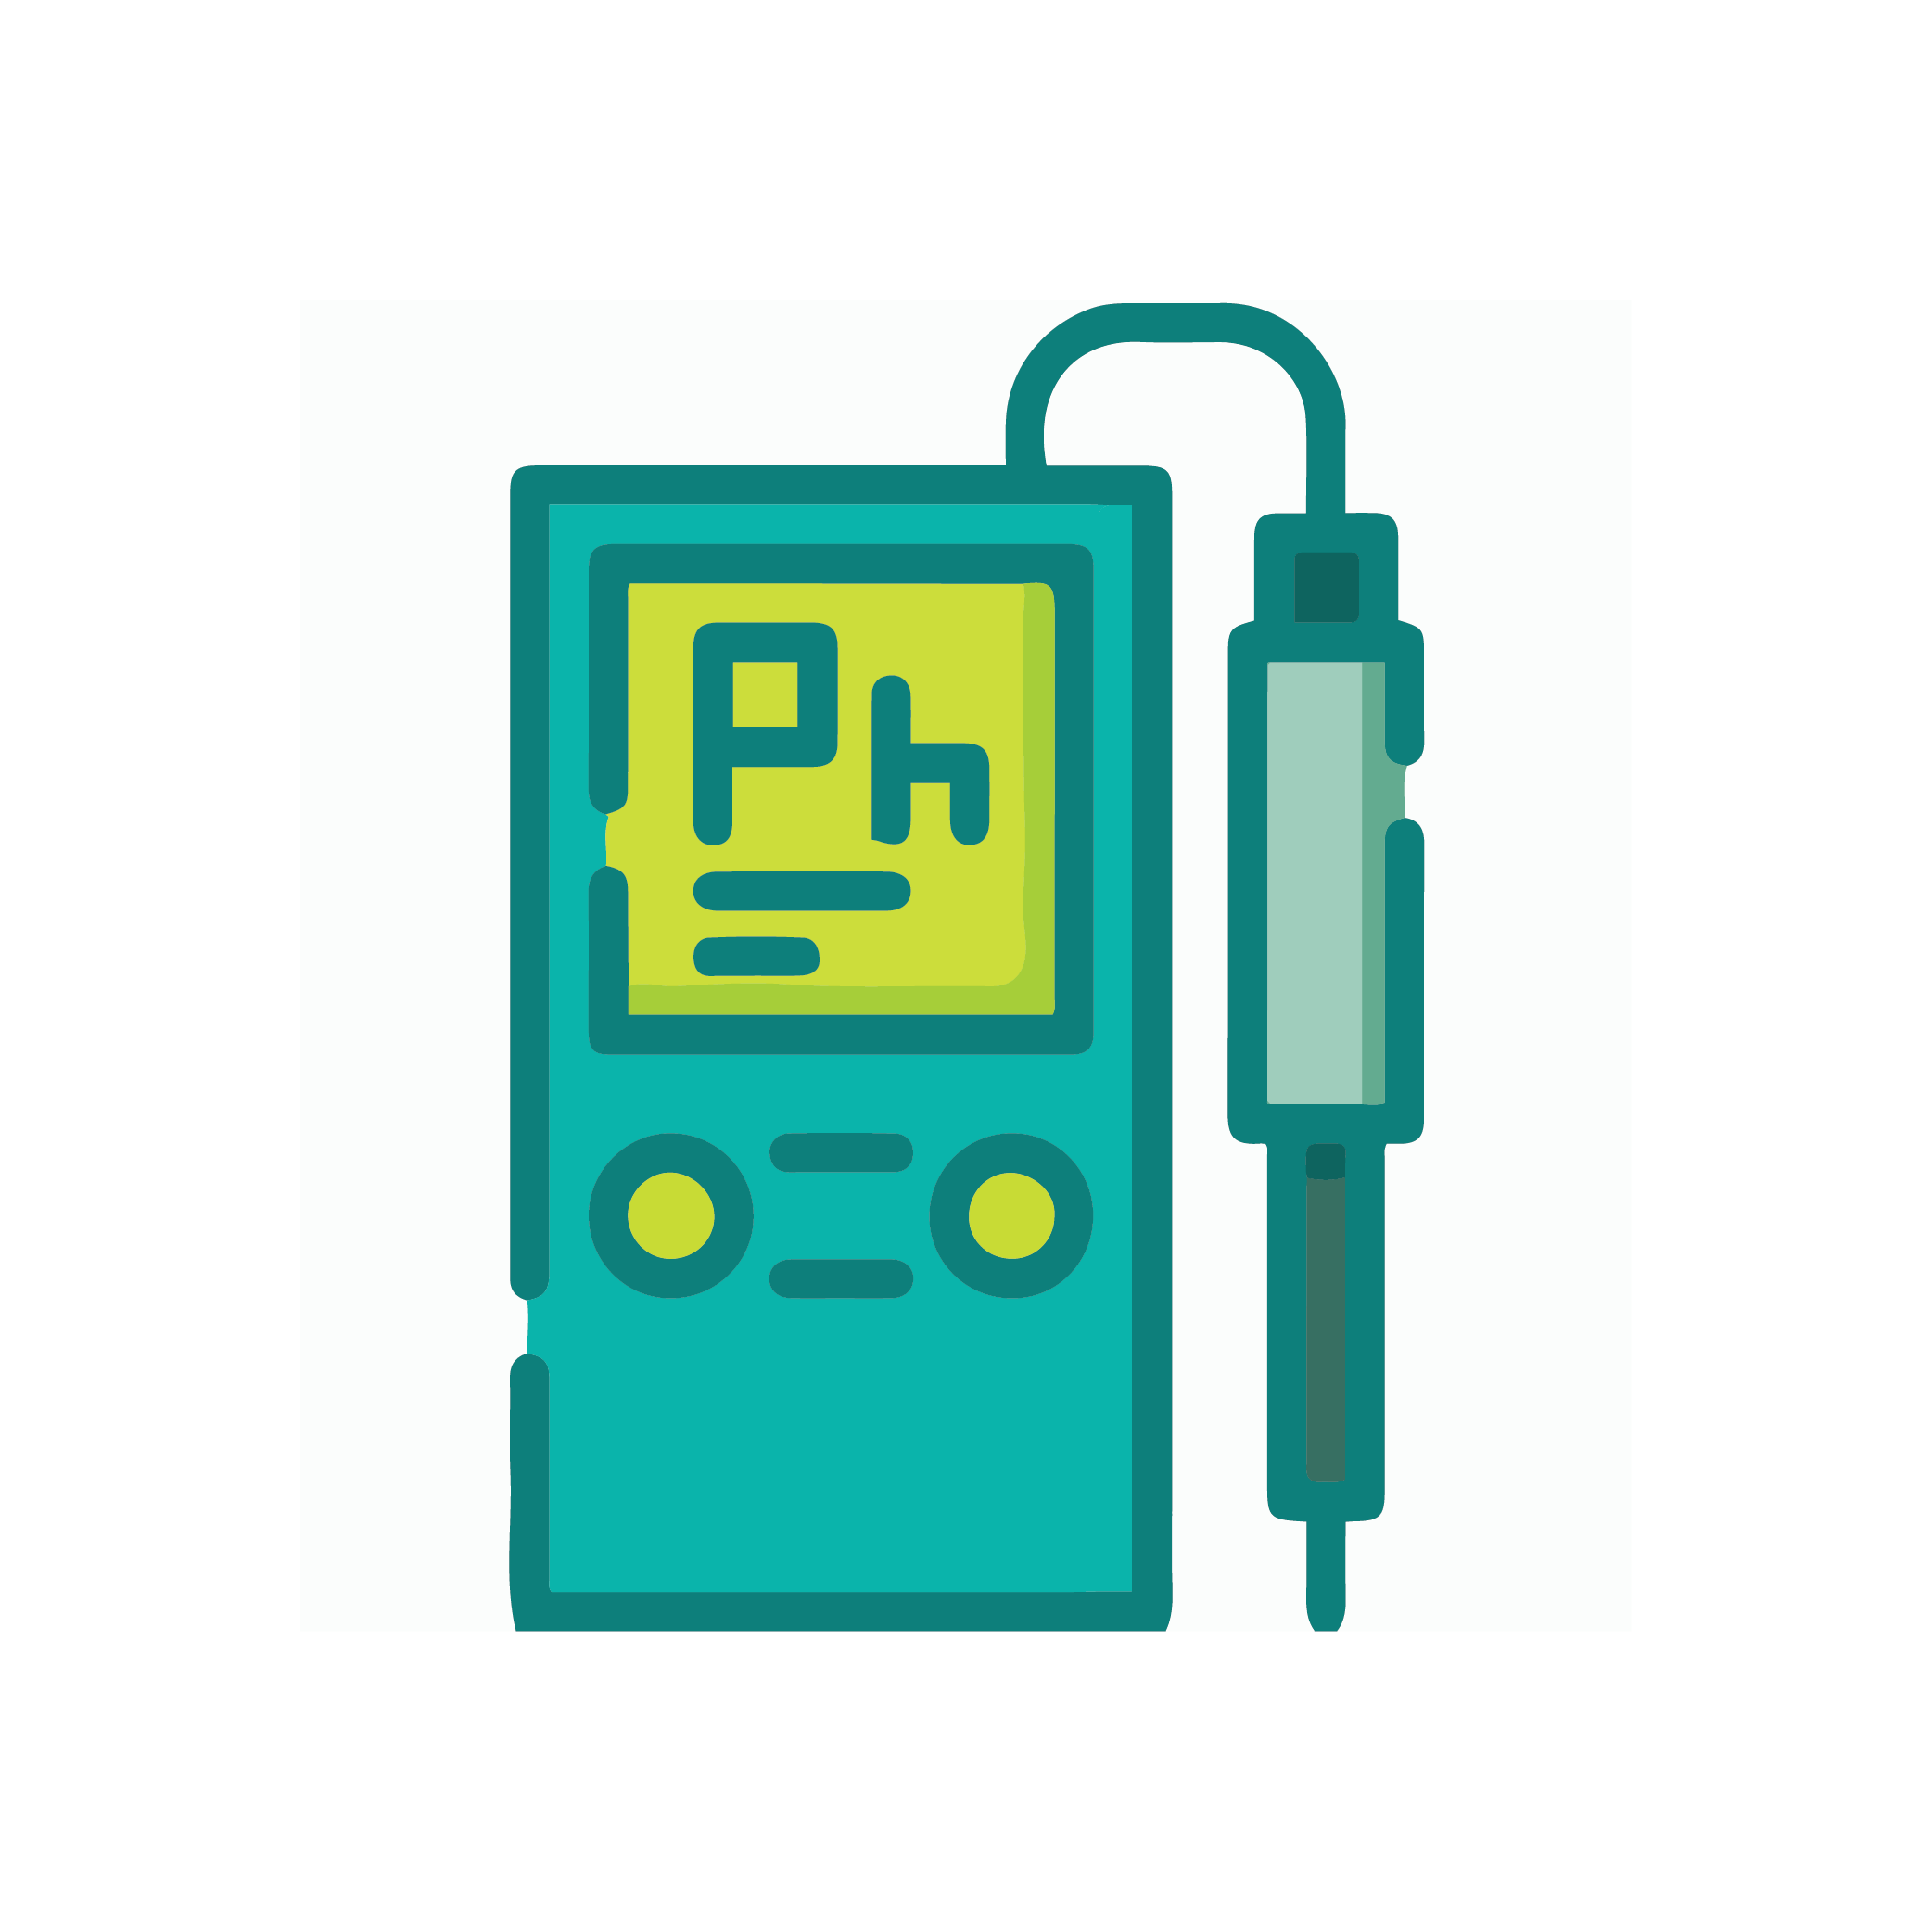 pH and Electrochemistry